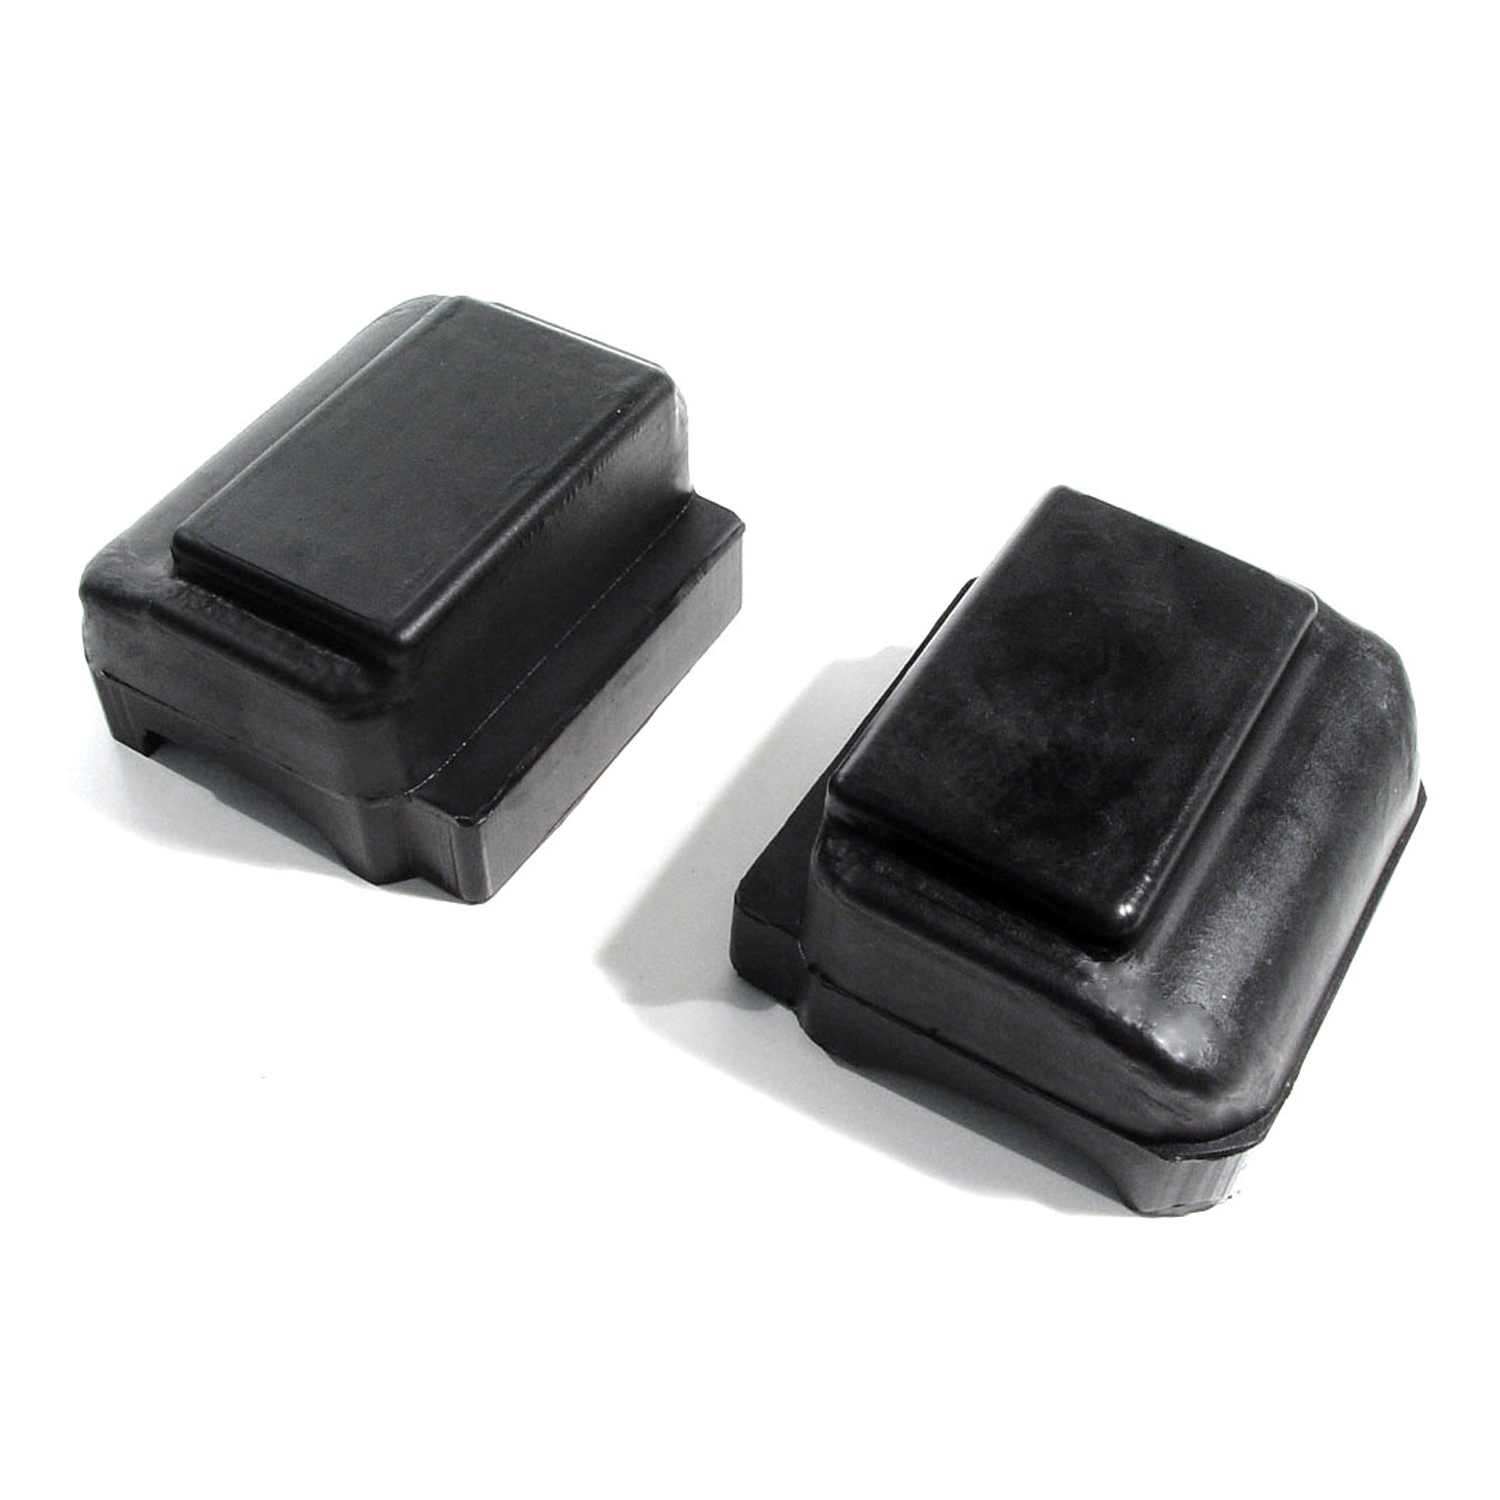 1930 Cord L-29 Front Spring Insulators.  Made of tough rubber-RP 23